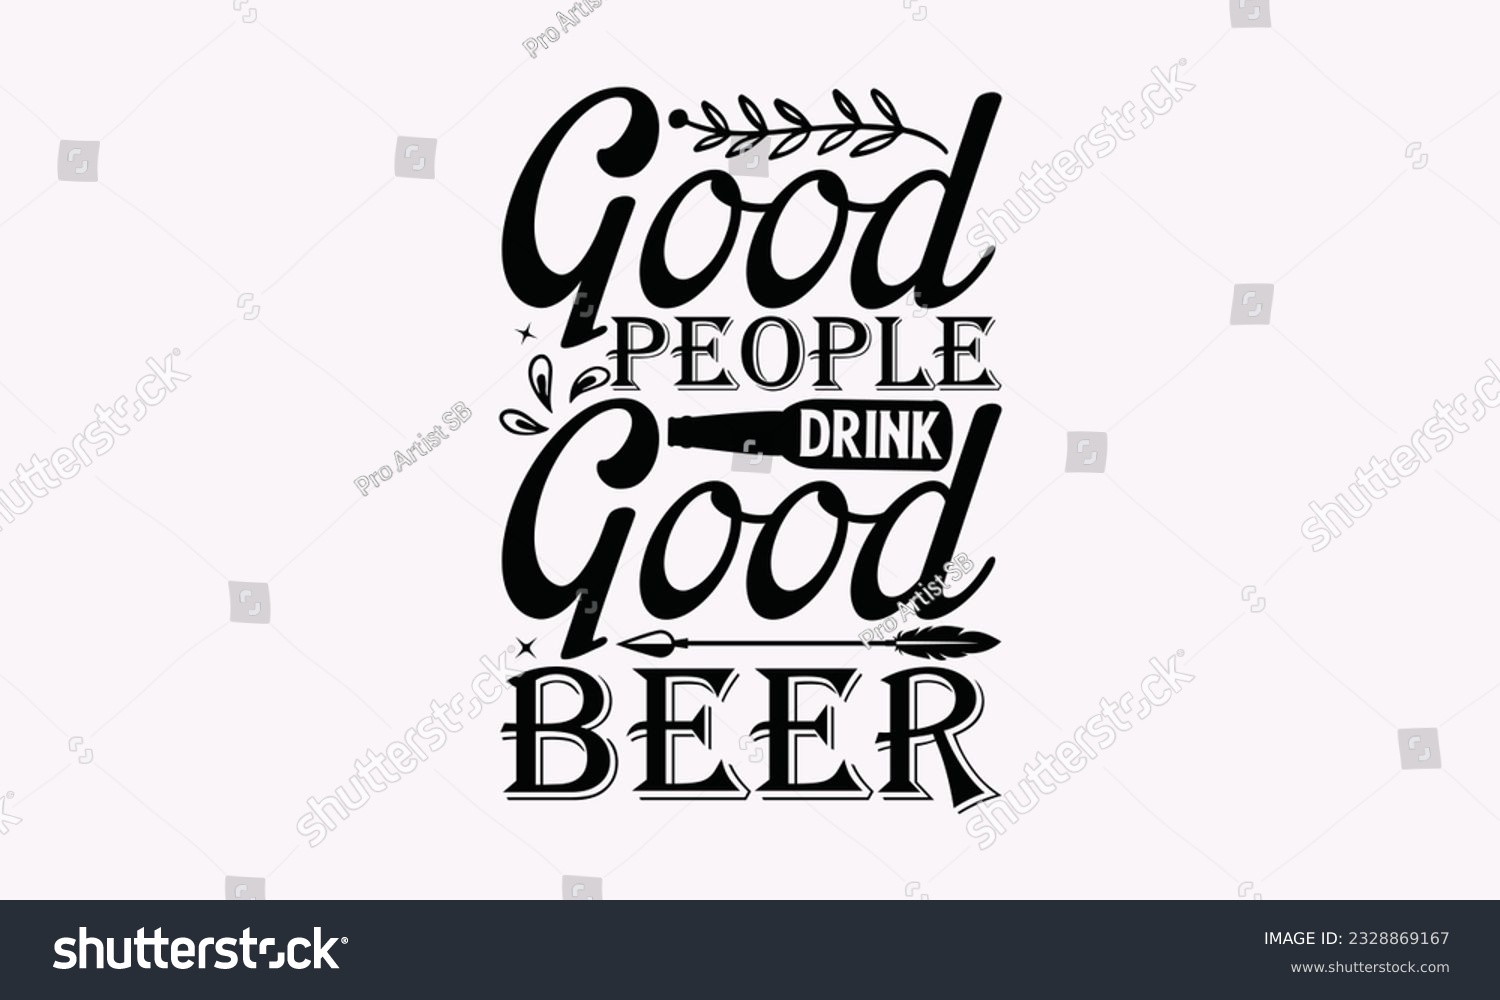 SVG of Good People Drink Good Beer - Alcohol SVG Design, Drink Quotes, Calligraphy graphic design, Typography poster with old style camera and quote. svg